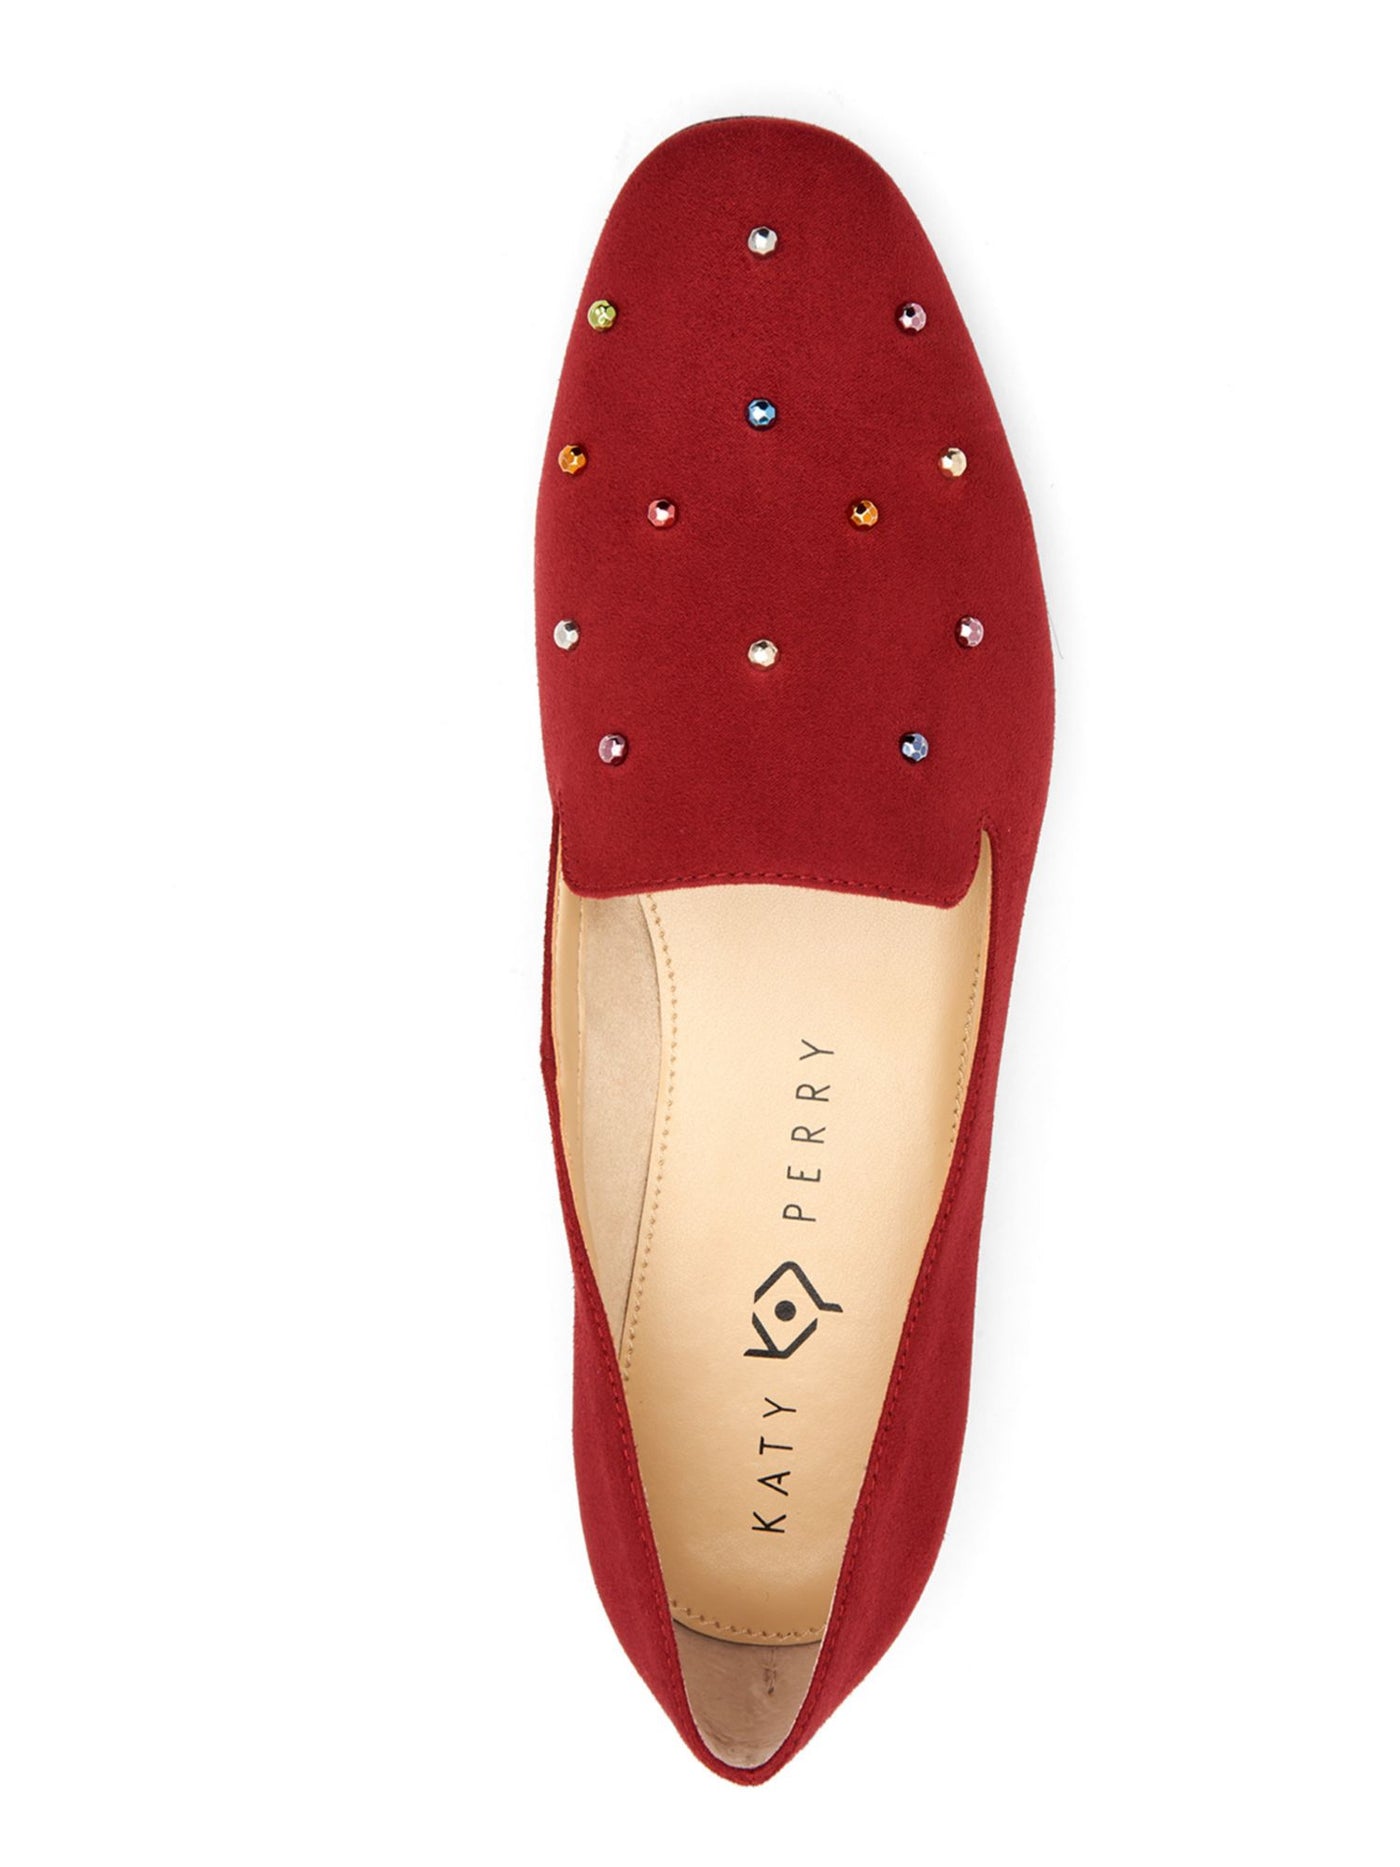 KATY PERRY Womens Red Studded Padded Allena Round Toe Slip On Flats Shoes 7.5 M